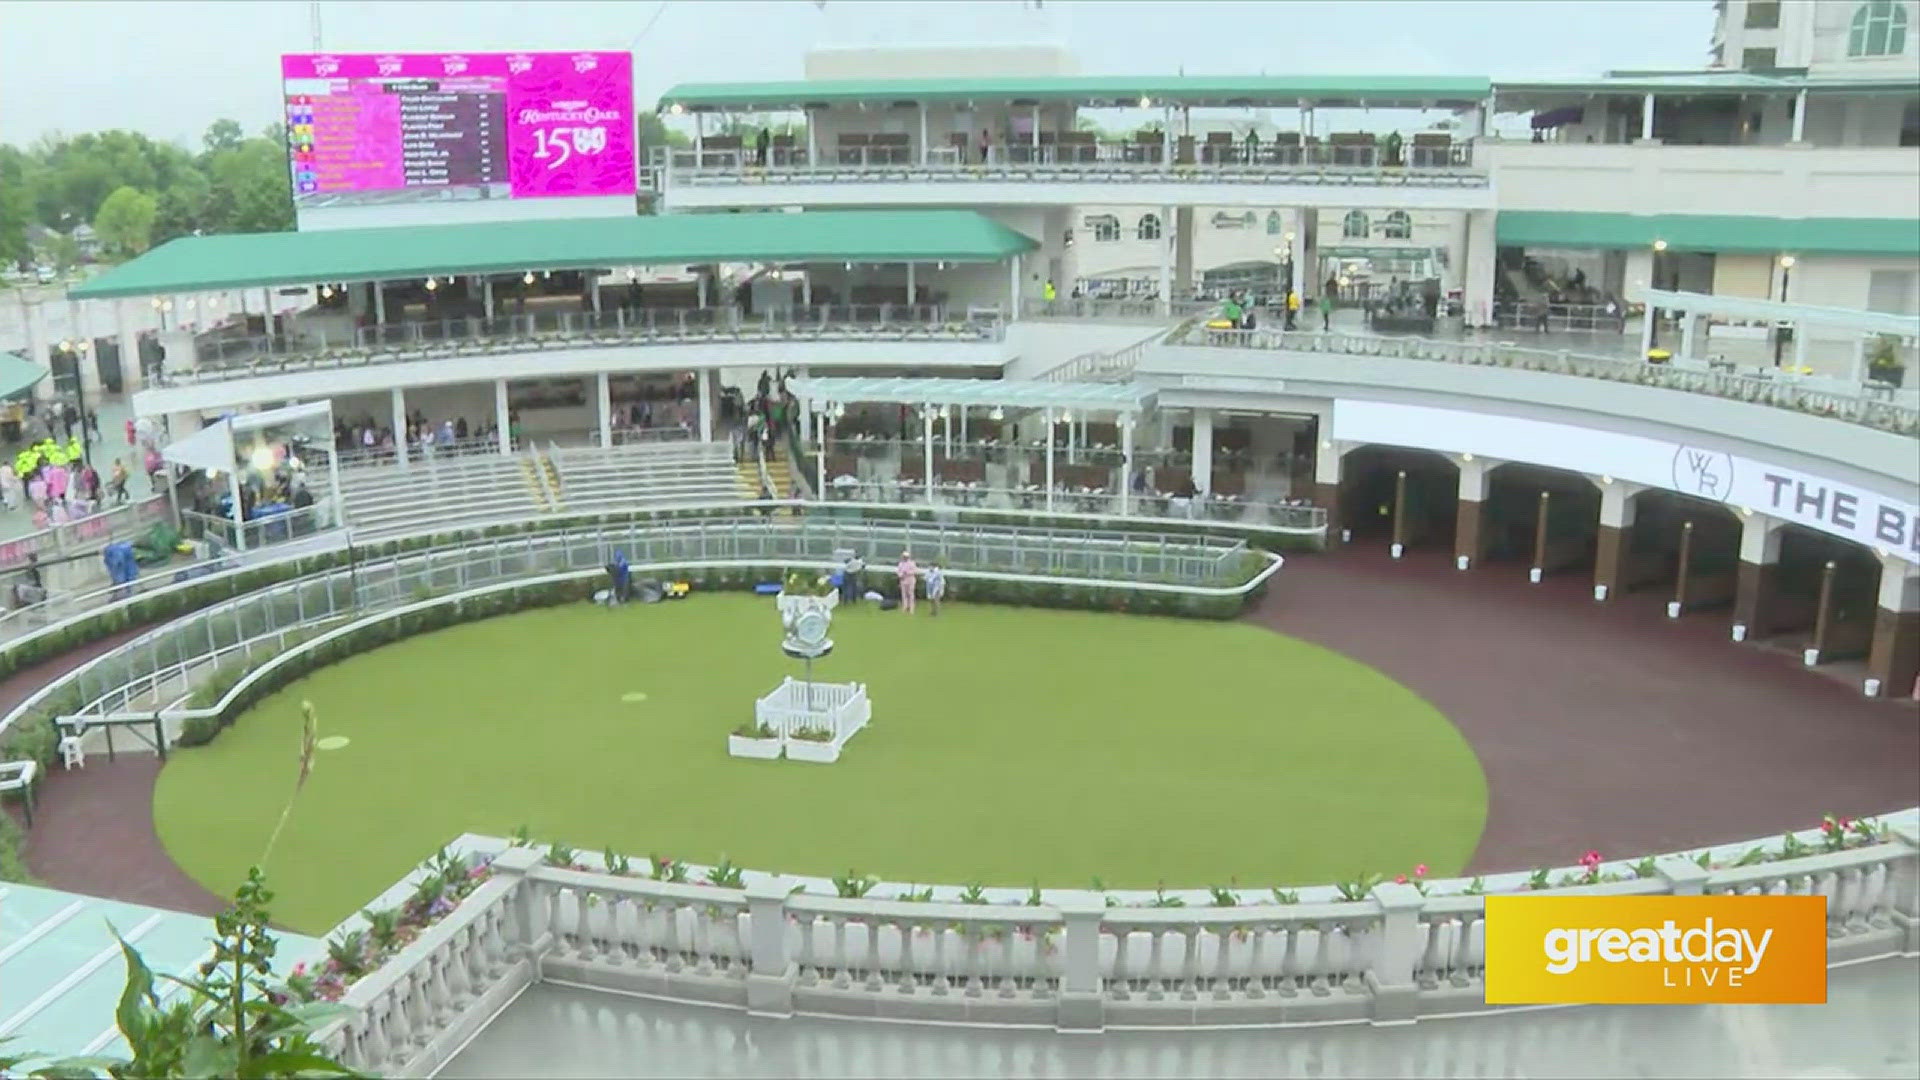 The Paddock at Churchill Downs has received new renovations that guests will love.